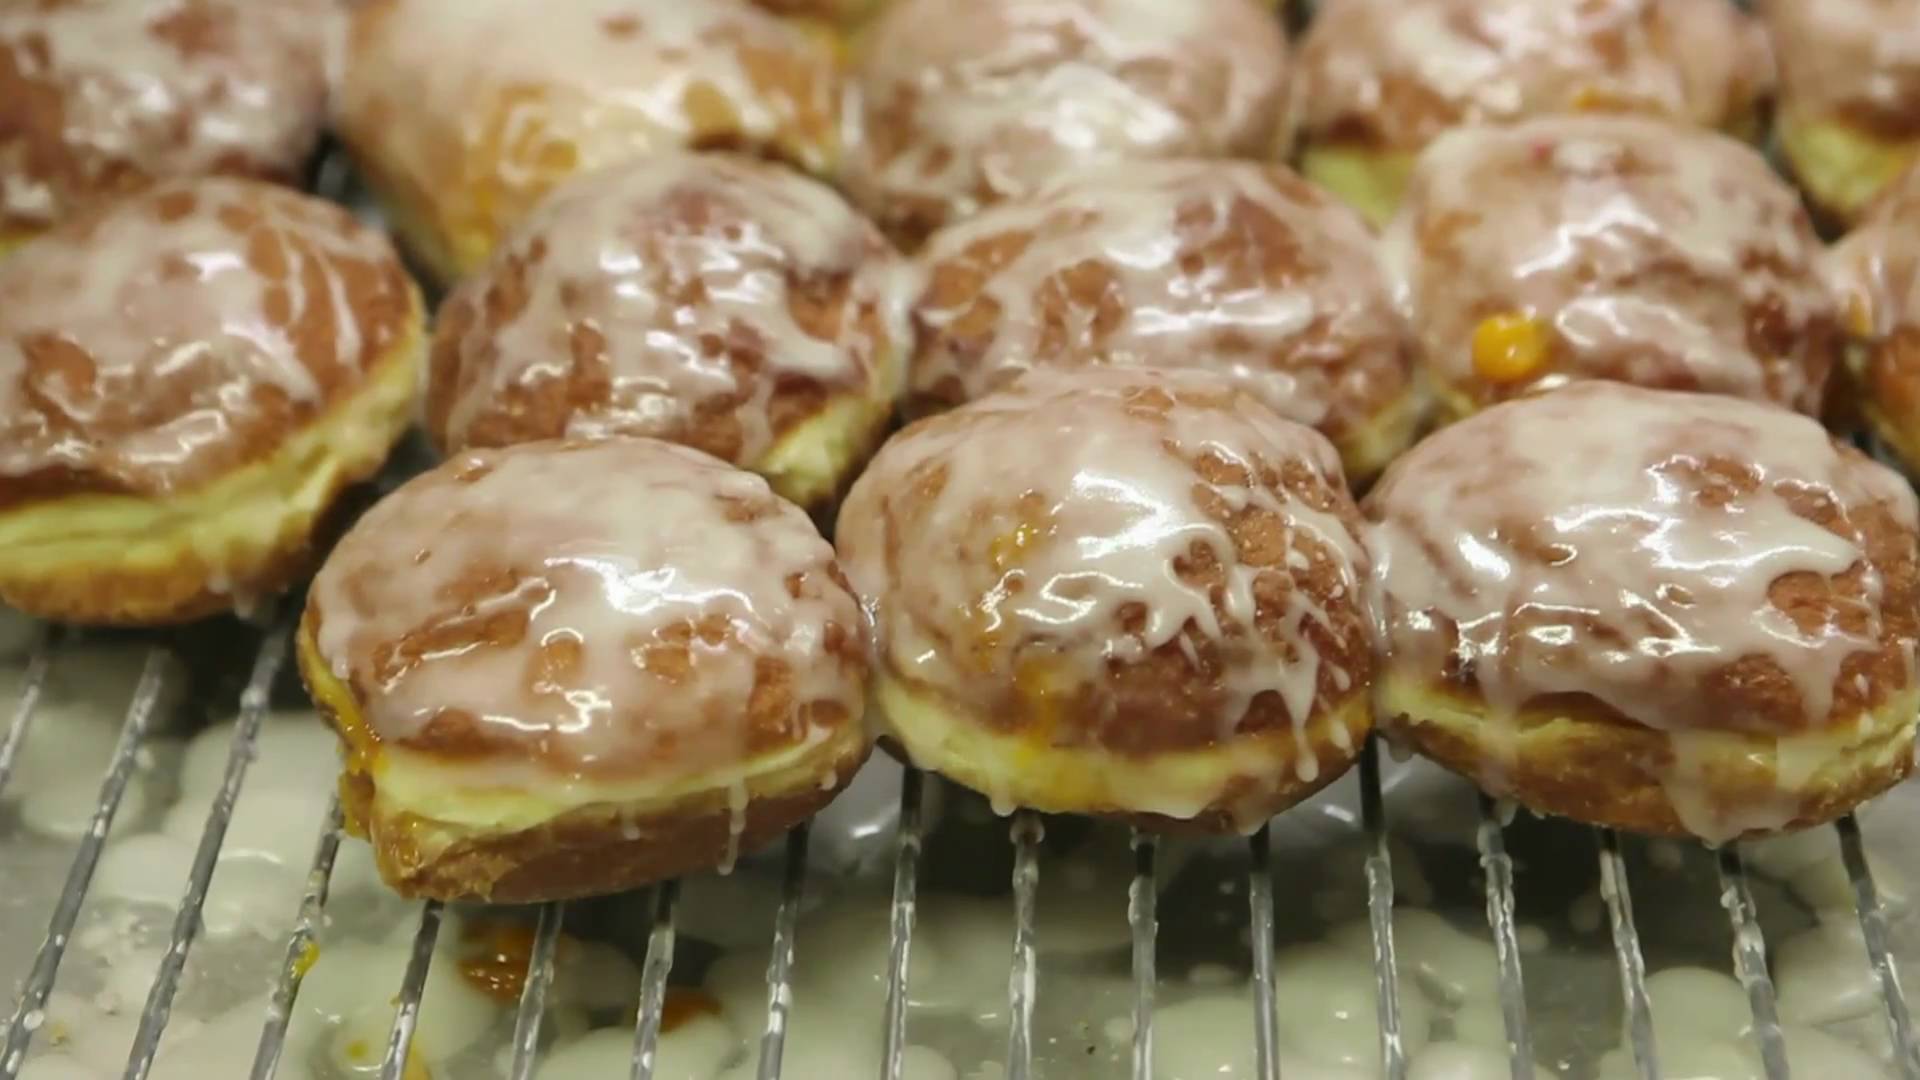 Fat Tuesday in Chicago: Paczki Day